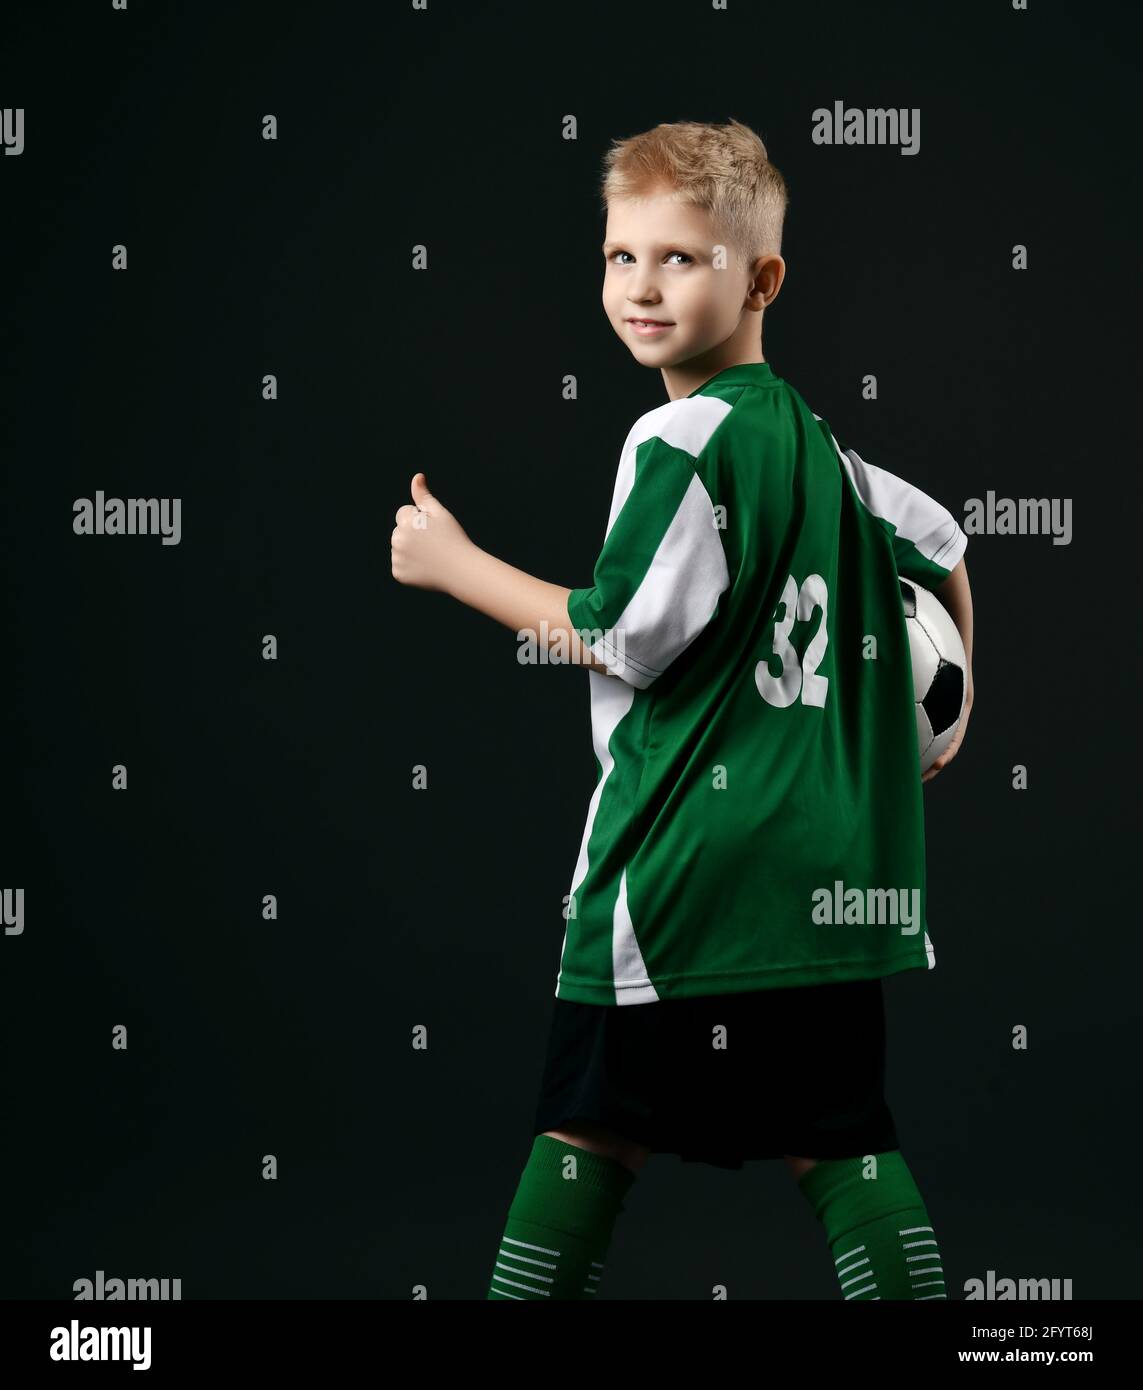 Blond smiling boy child in sports green and white clothes standing holding soccer ball and showing thumbs up sign Stock Photo